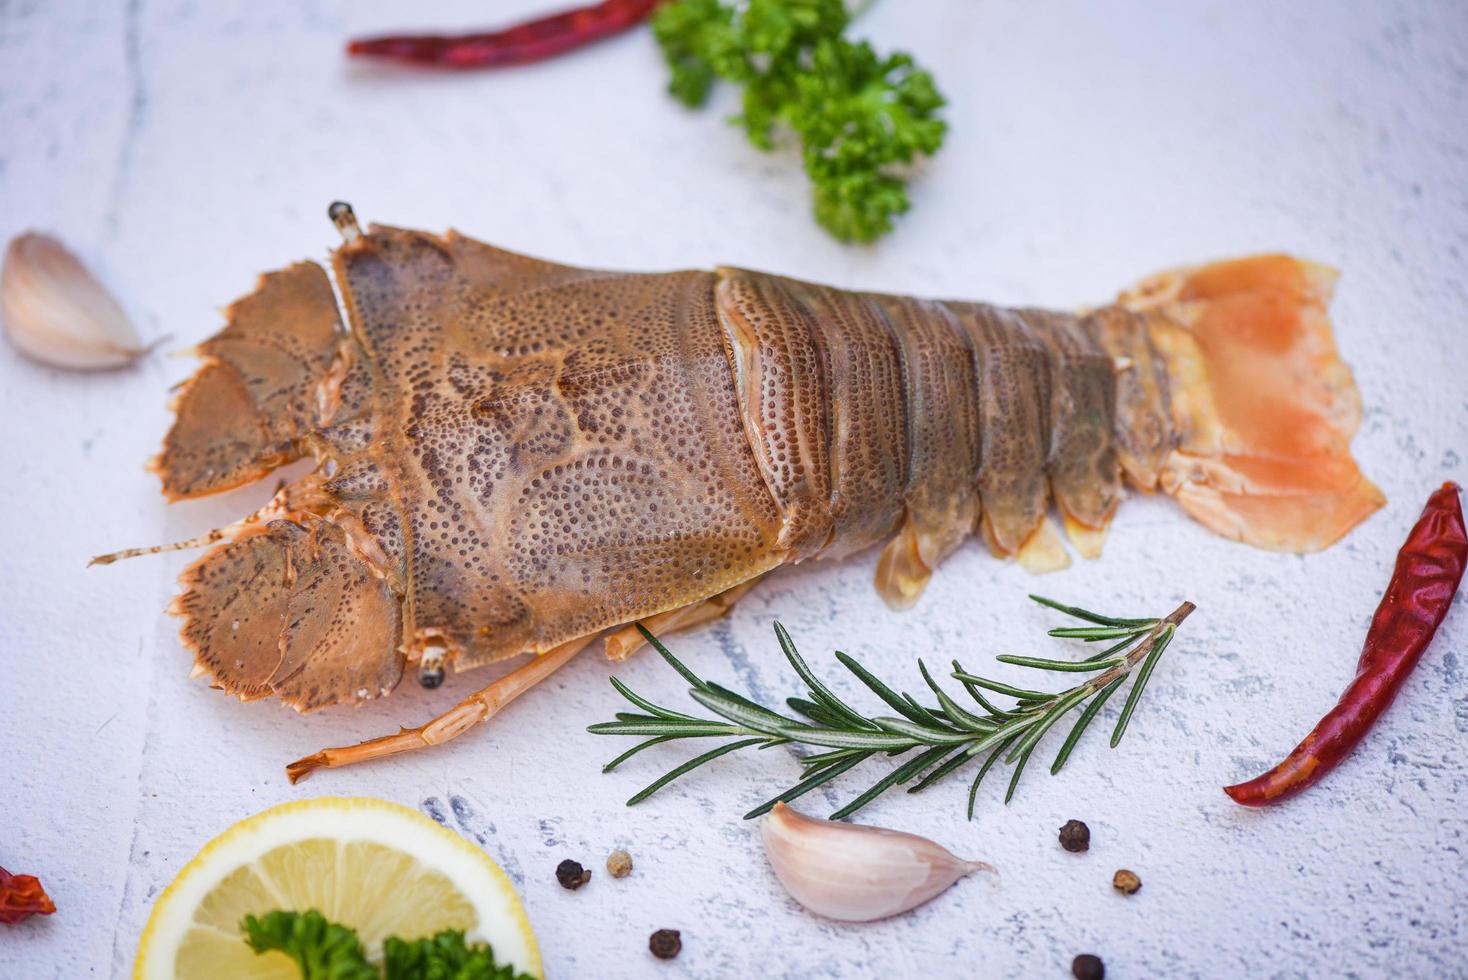 Raw flathead lobster shrimps with herbs and spices, fresh slipper lobster flathead for cooking in the seafood restaurant or seafood market photo